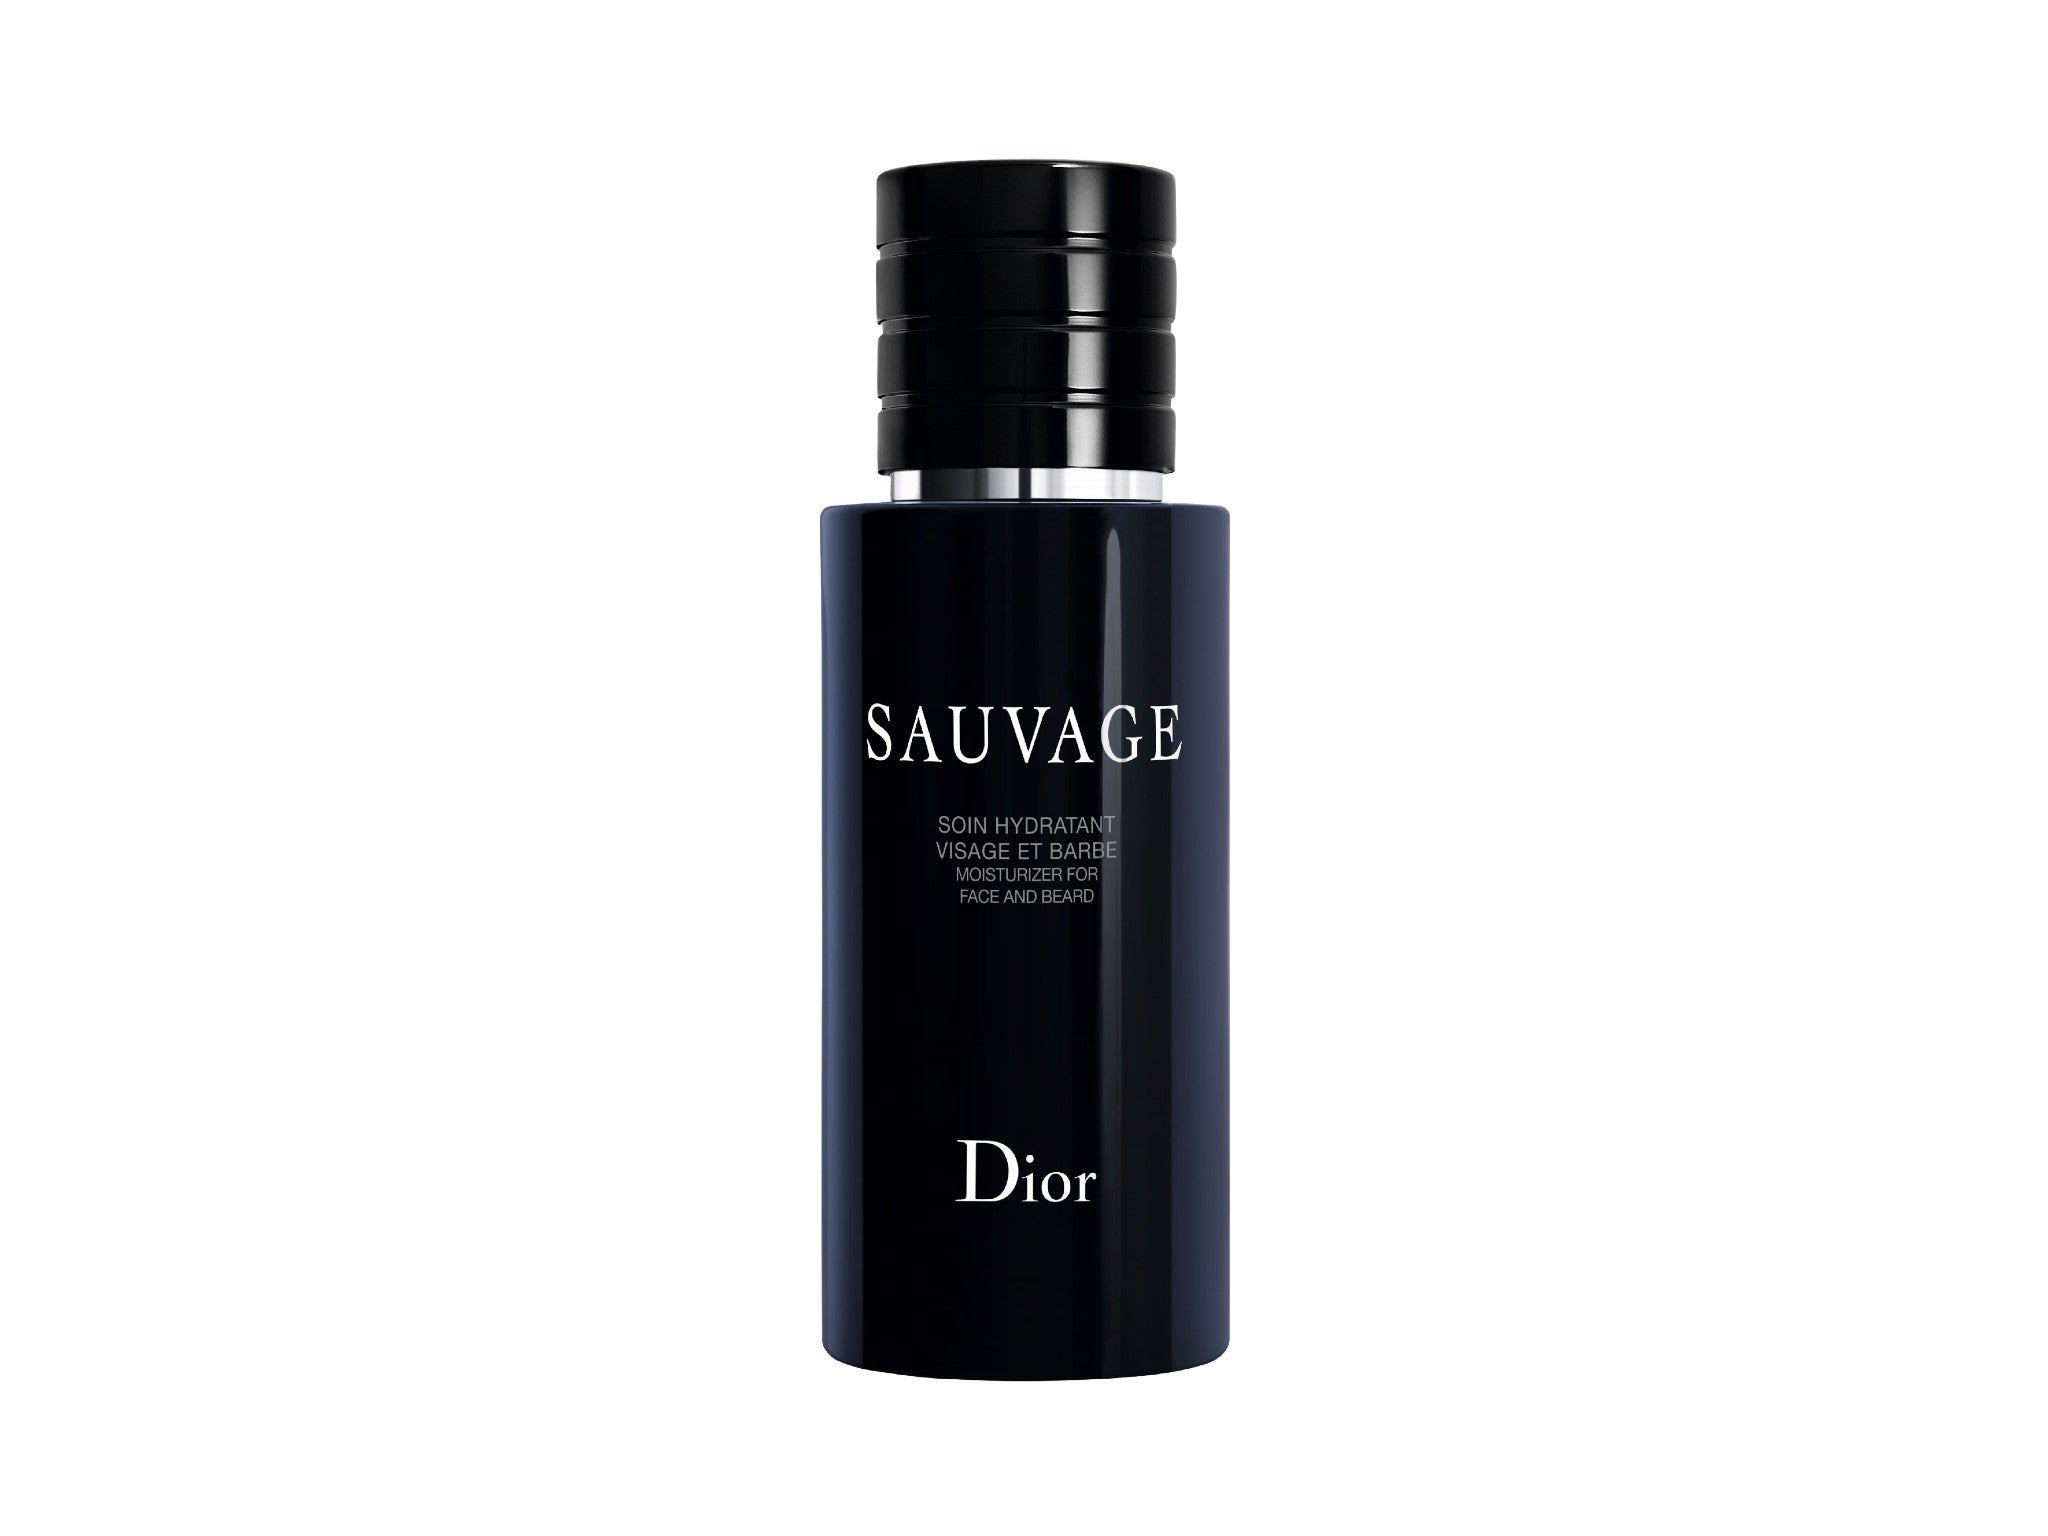 Dior Sauvage moisturizer for face and beard indybest